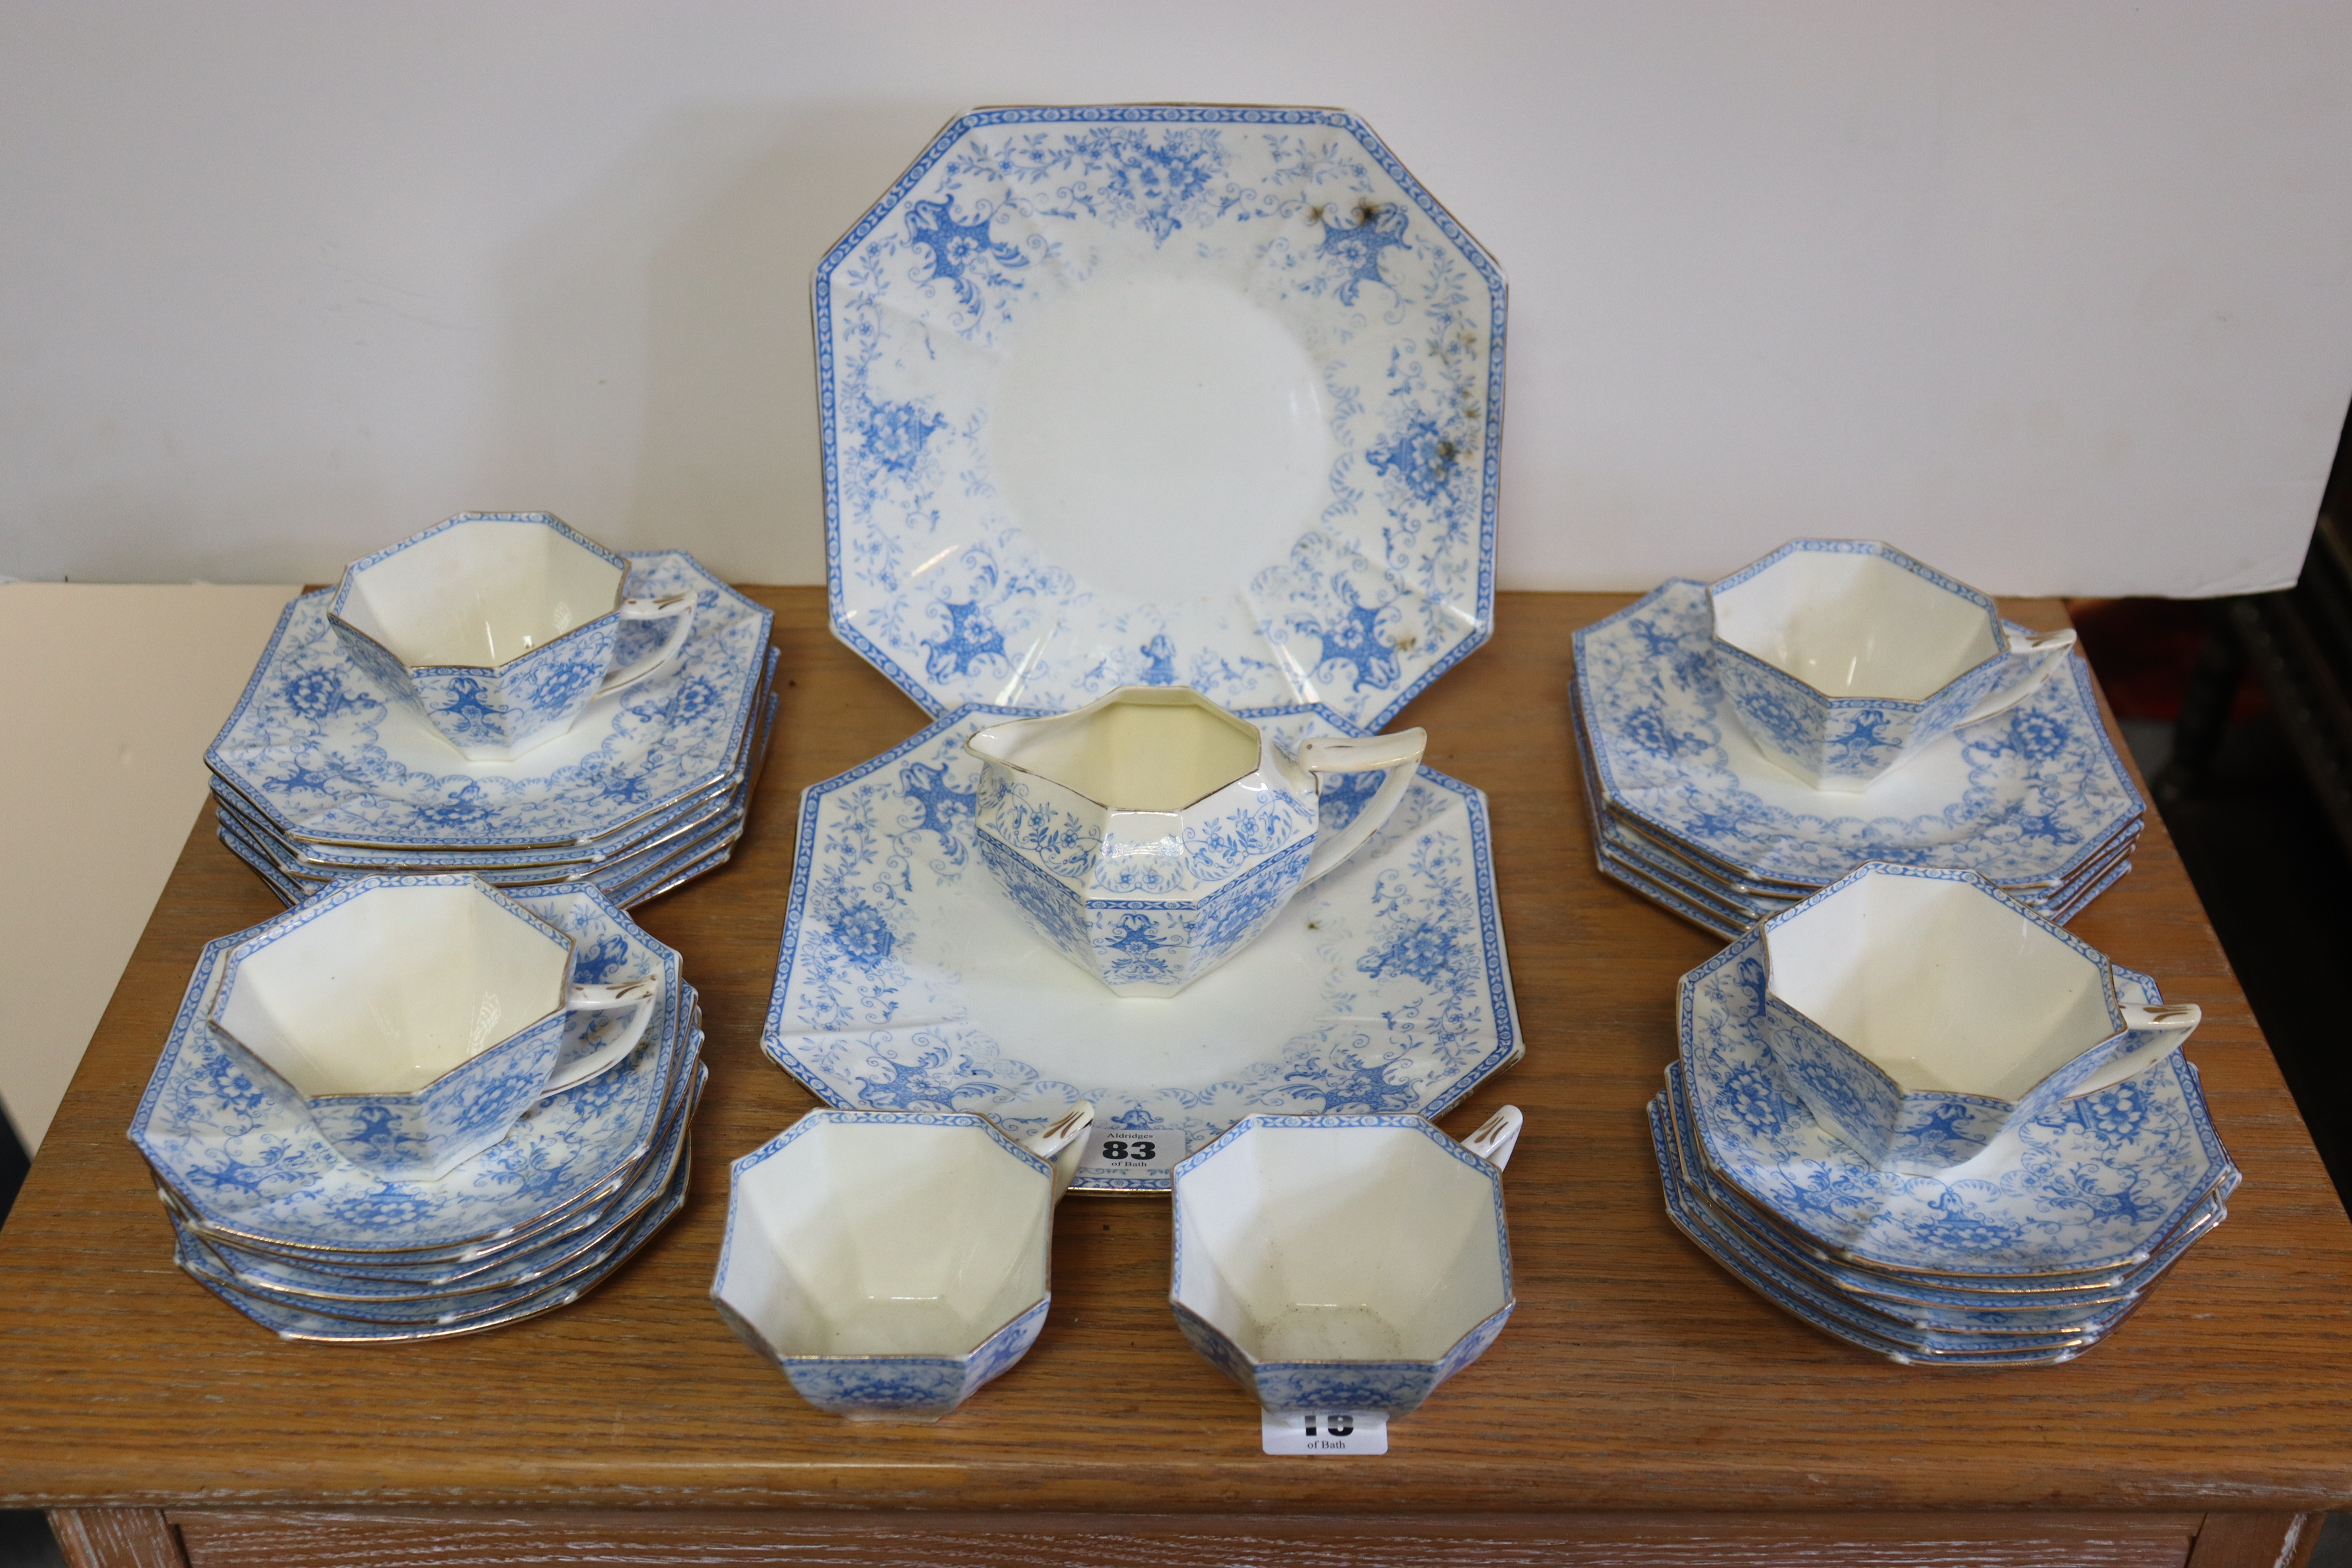 A Foley china blue & white floral decorated thirty-two-piece part tea service; a Coalport white